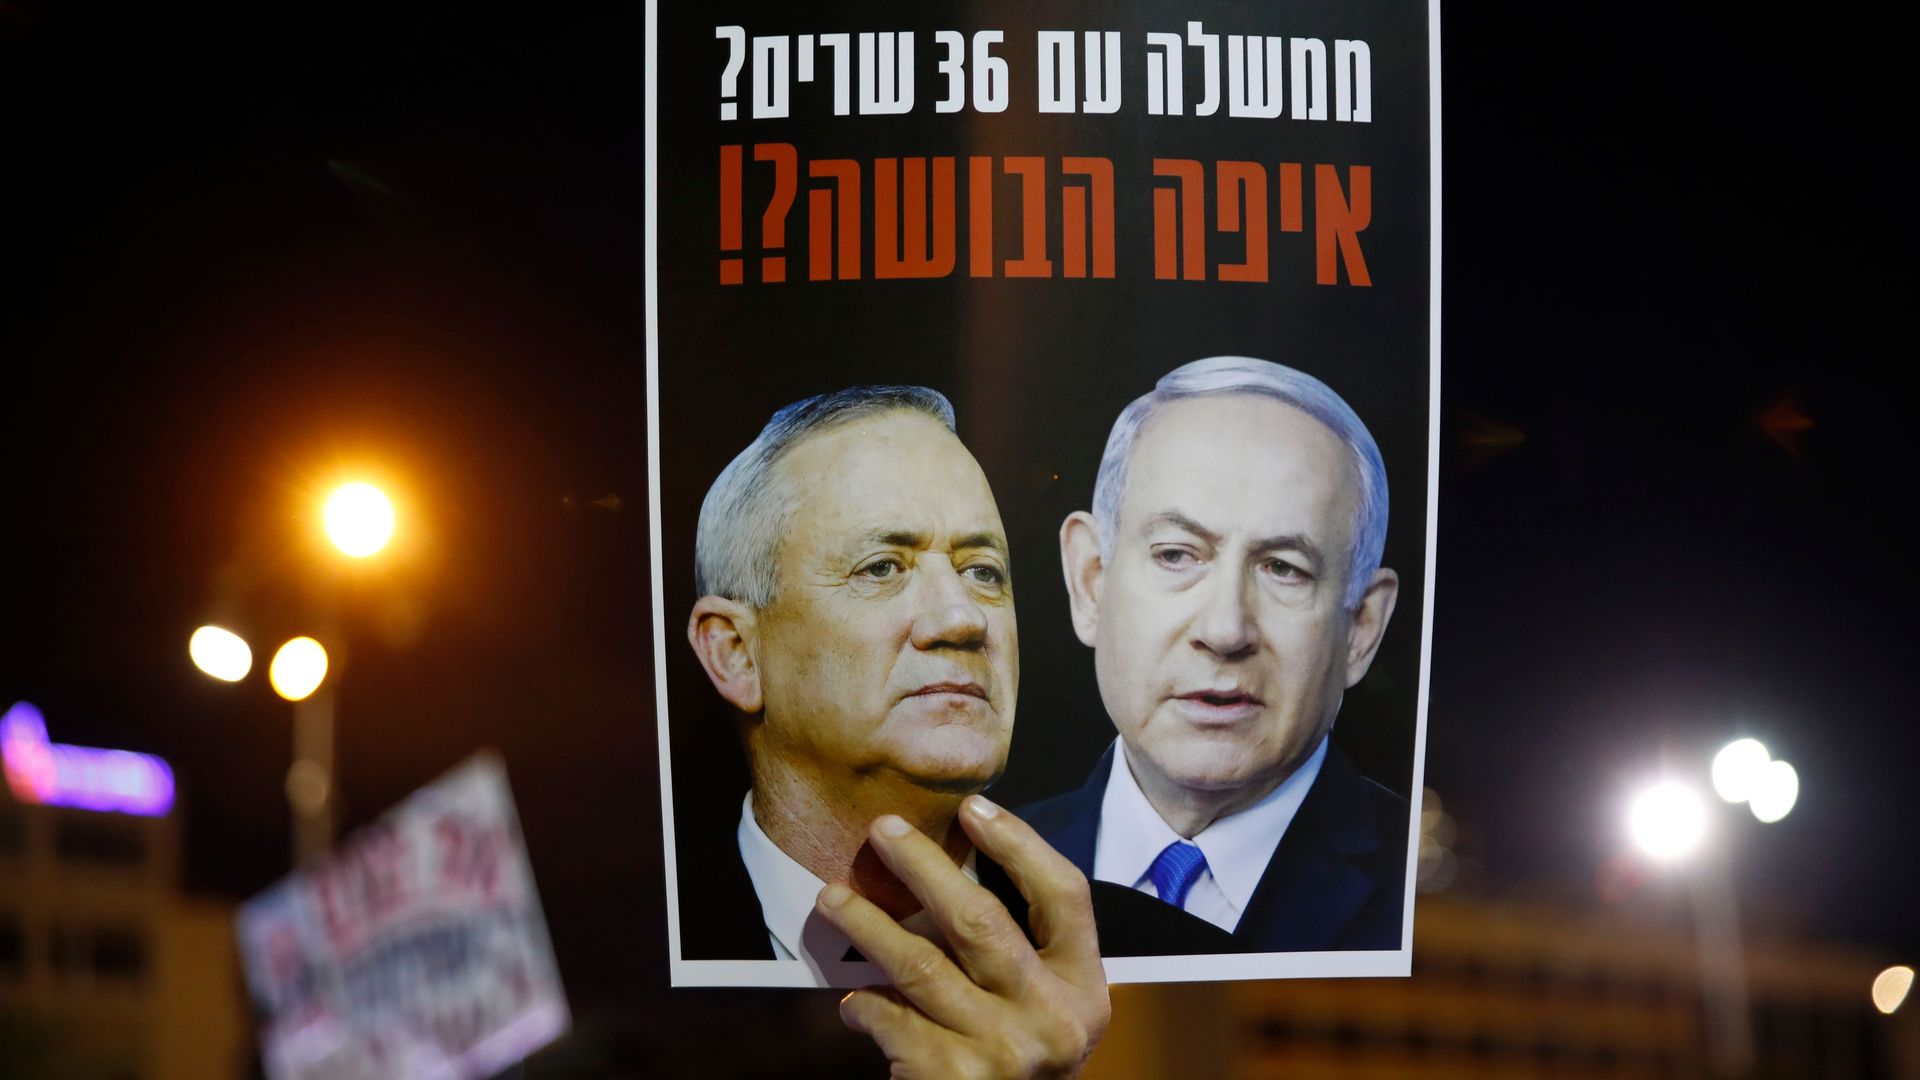 Protestor holding picture of Netanyahu and Gantz